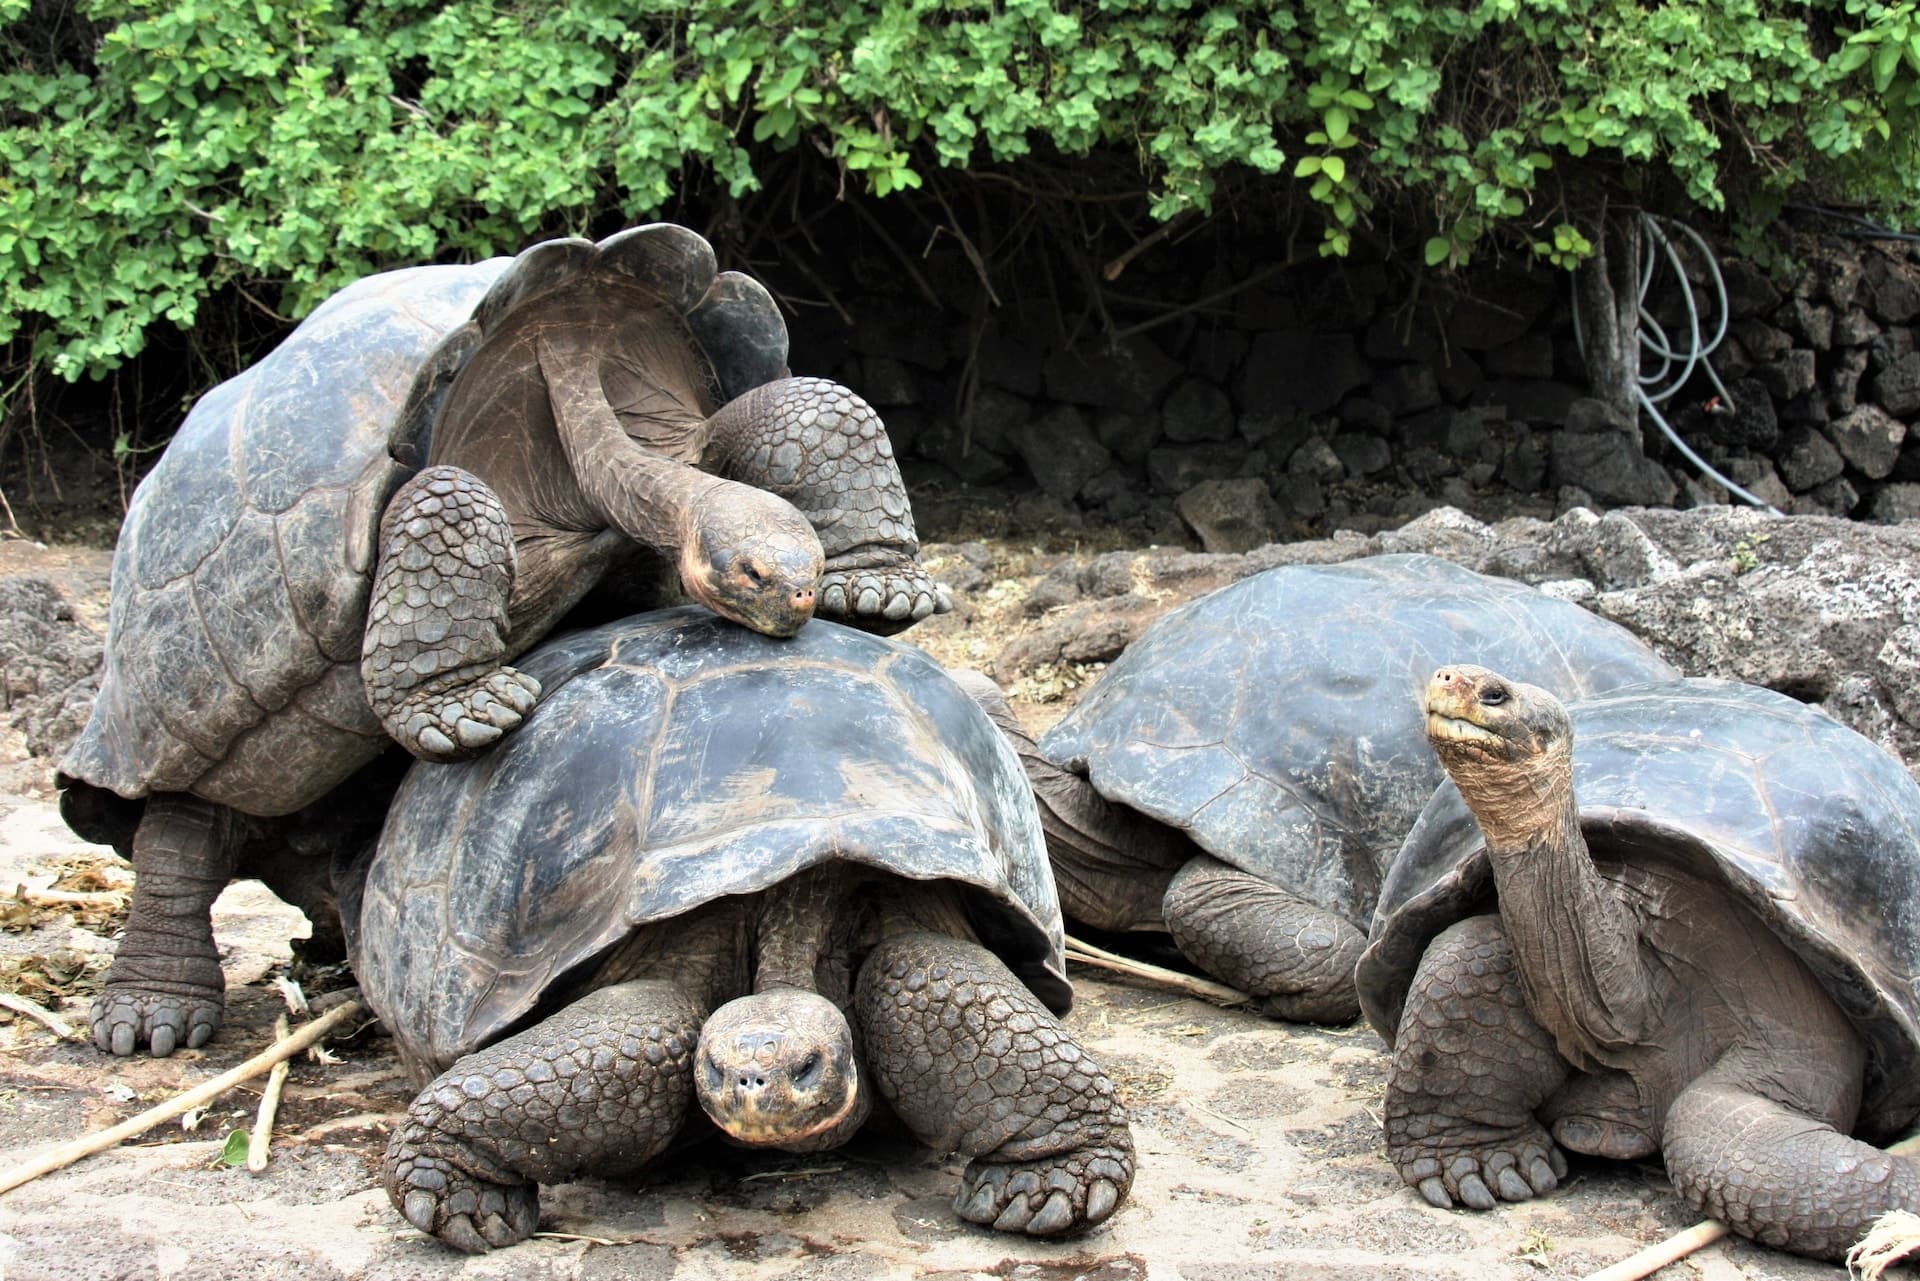 <p>Embark on a journey through the Galápagos Islands, following in the footsteps of Charles Darwin, to meet the unique and diverse animal species that inspired the theory of natural selection.</p>